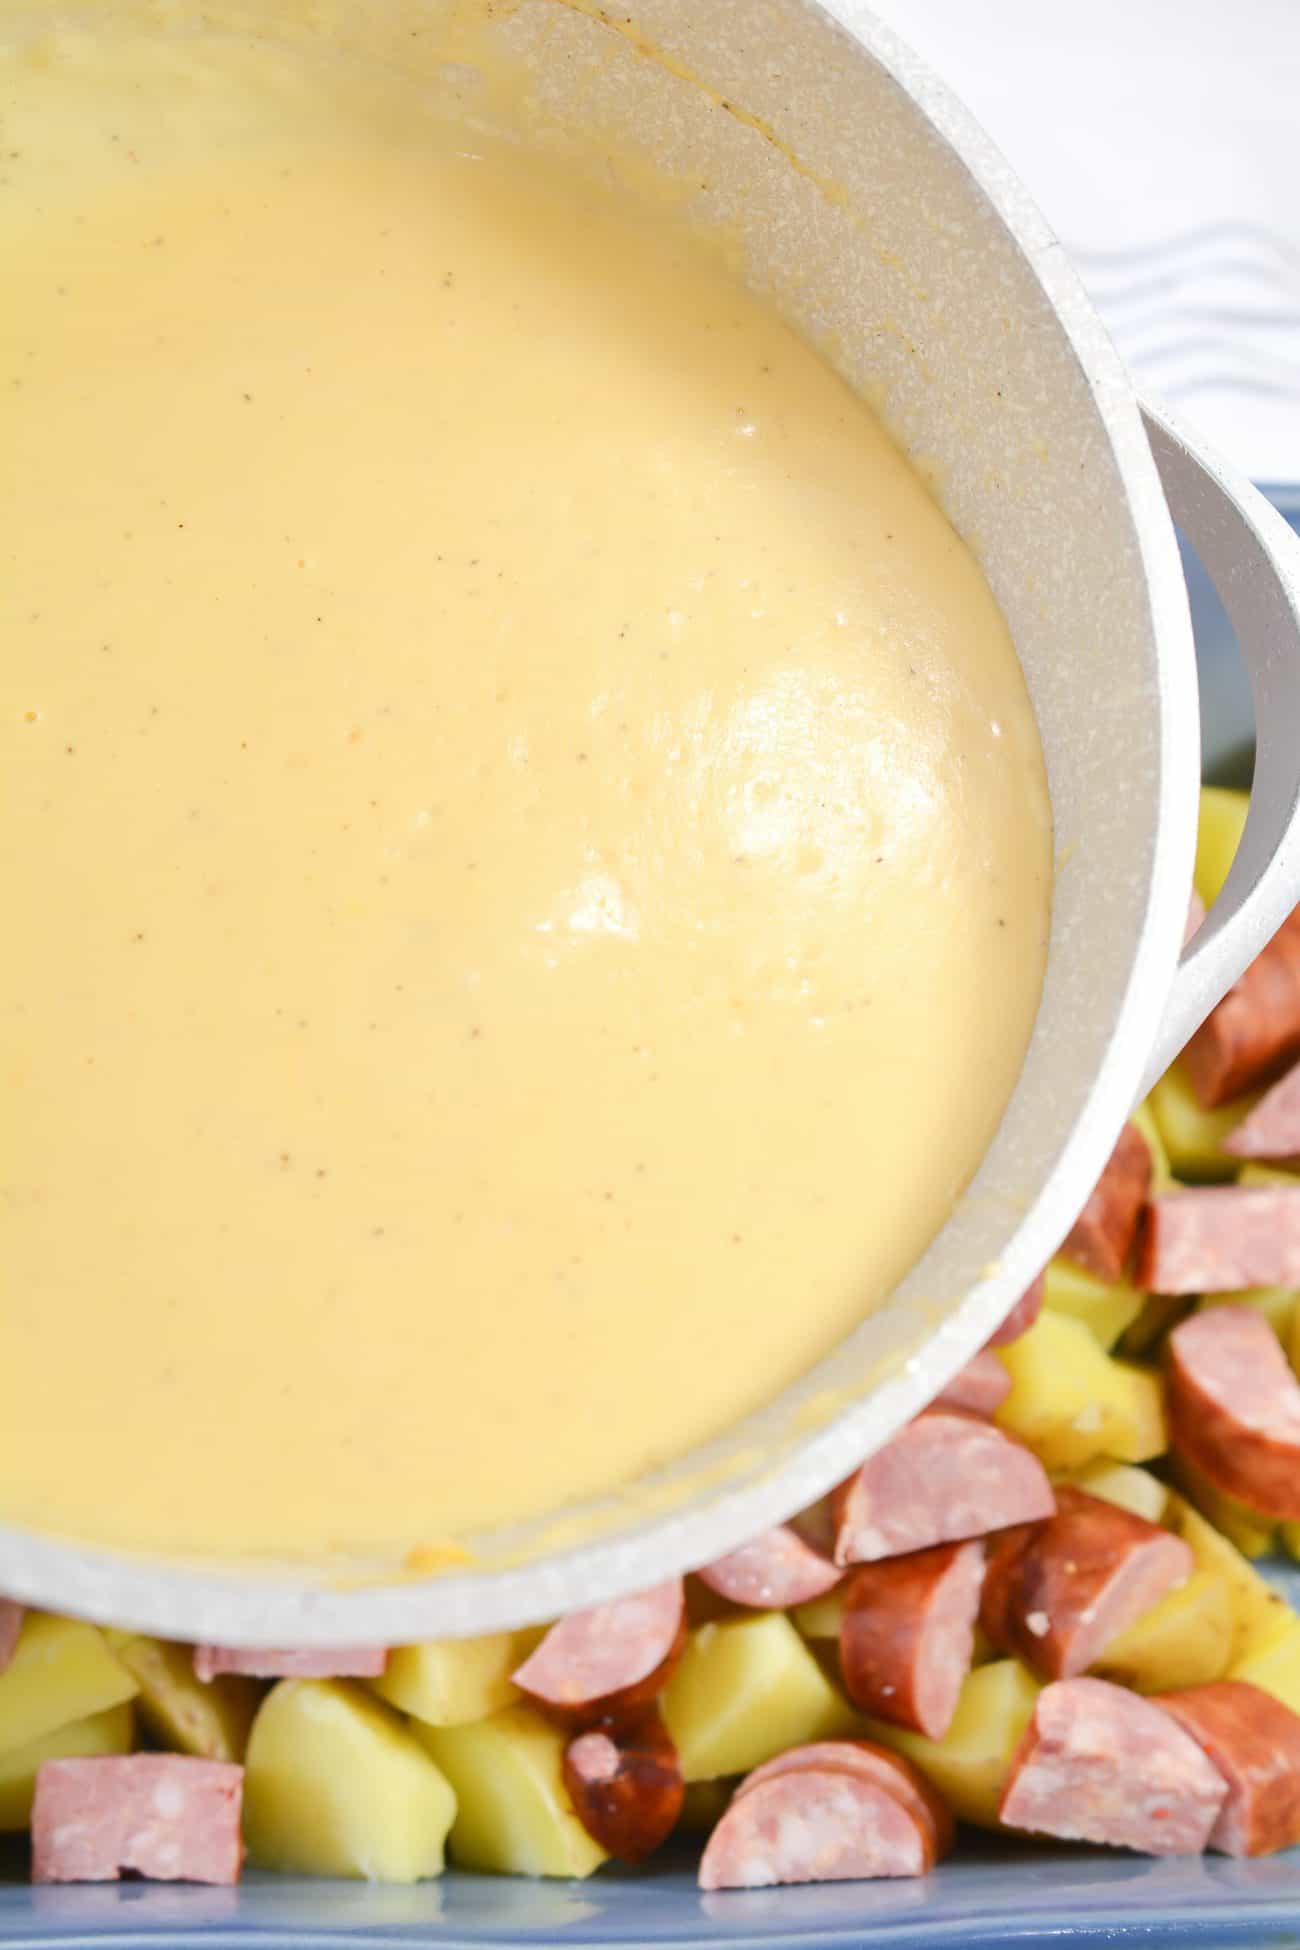 Pour the cheese sauce over the sausage and potatoes, and stir to combine.